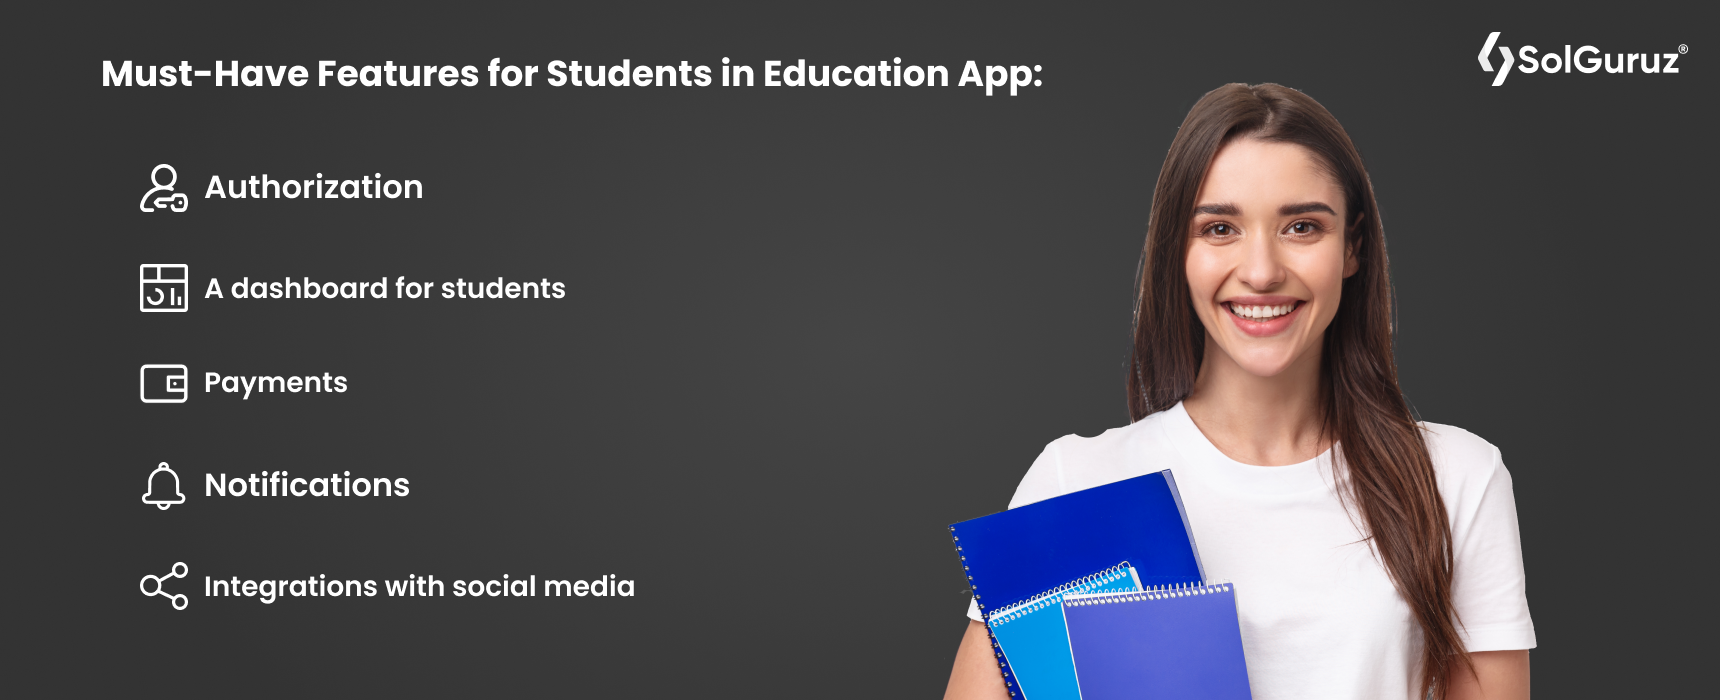 Must Have Features for Students in Education App_